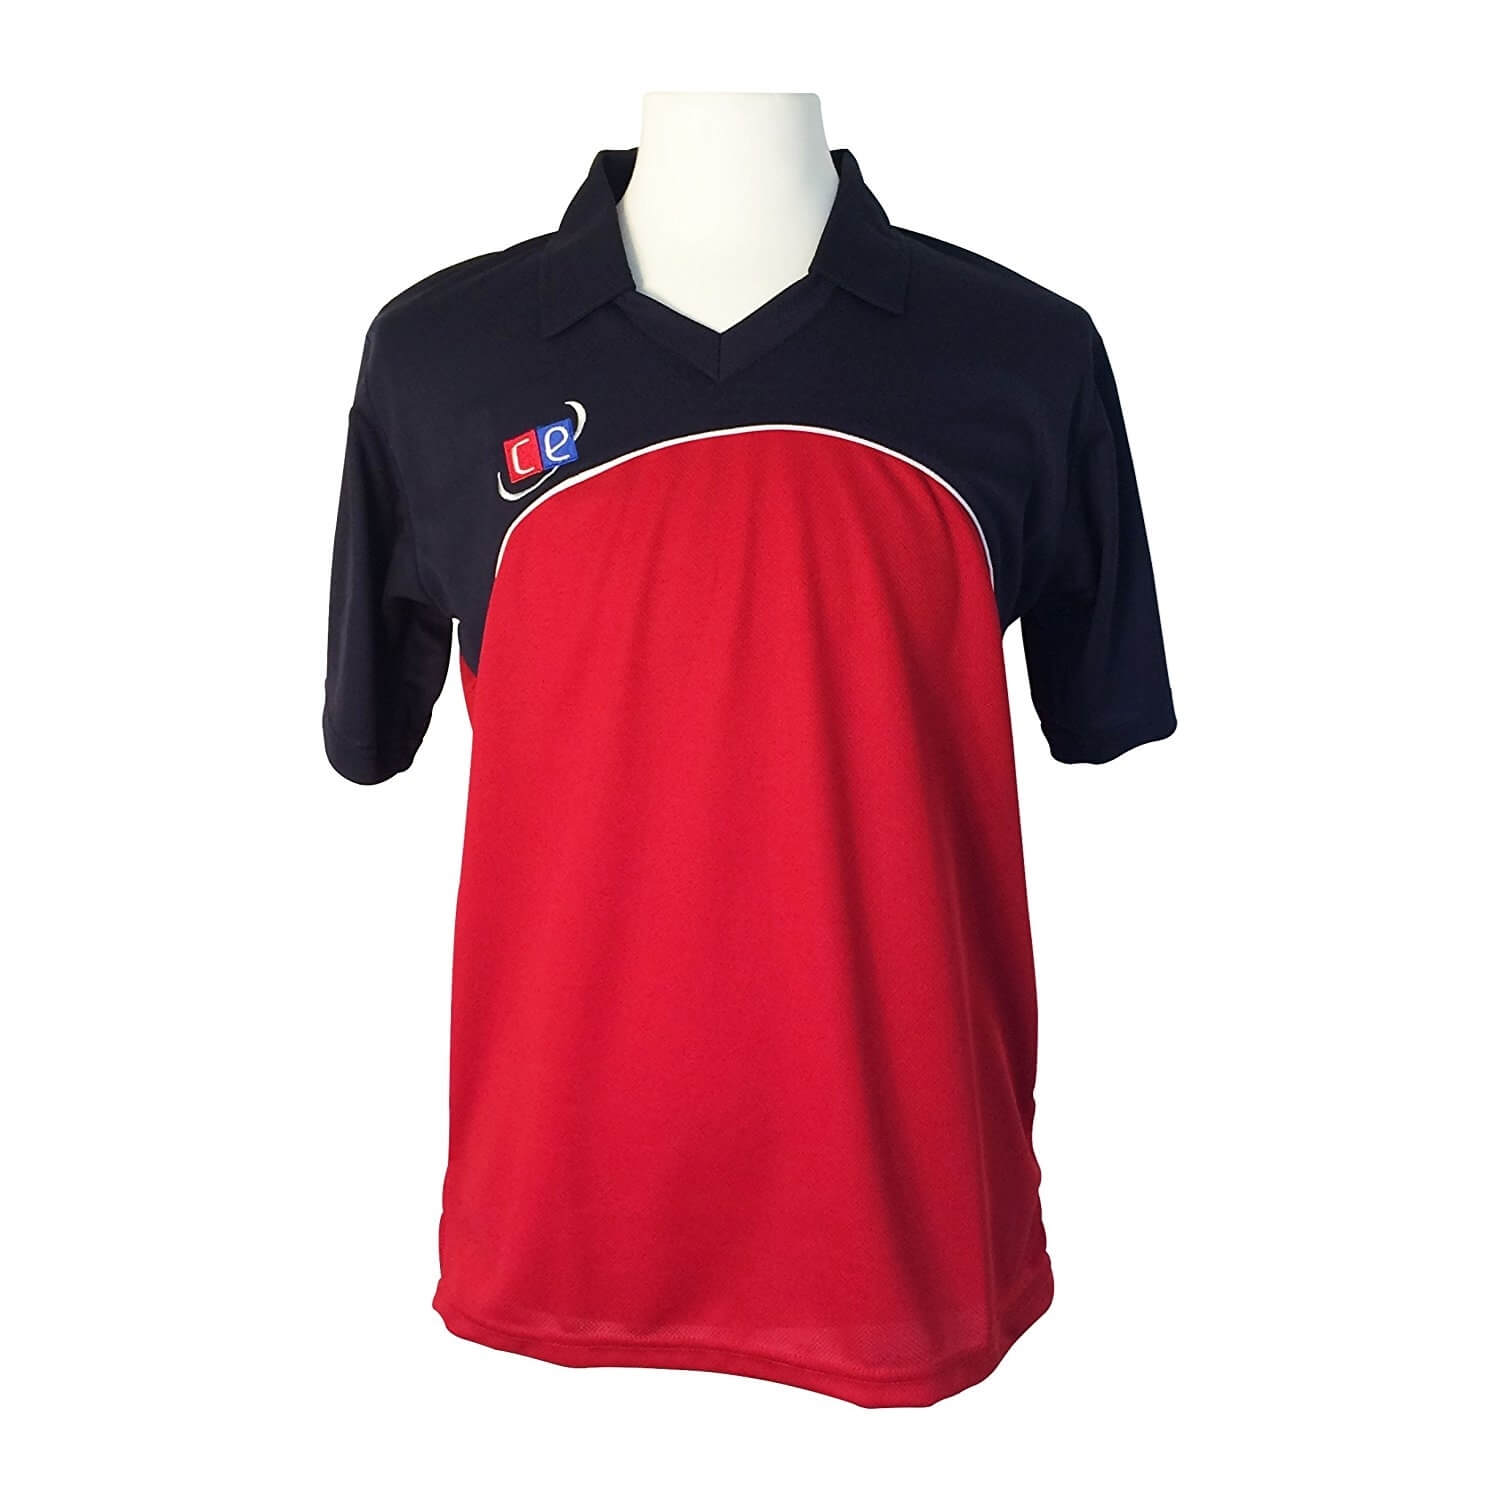 Colored Cricket Kit Shirts - England Colors Navy & Red - Half Sleeves ...